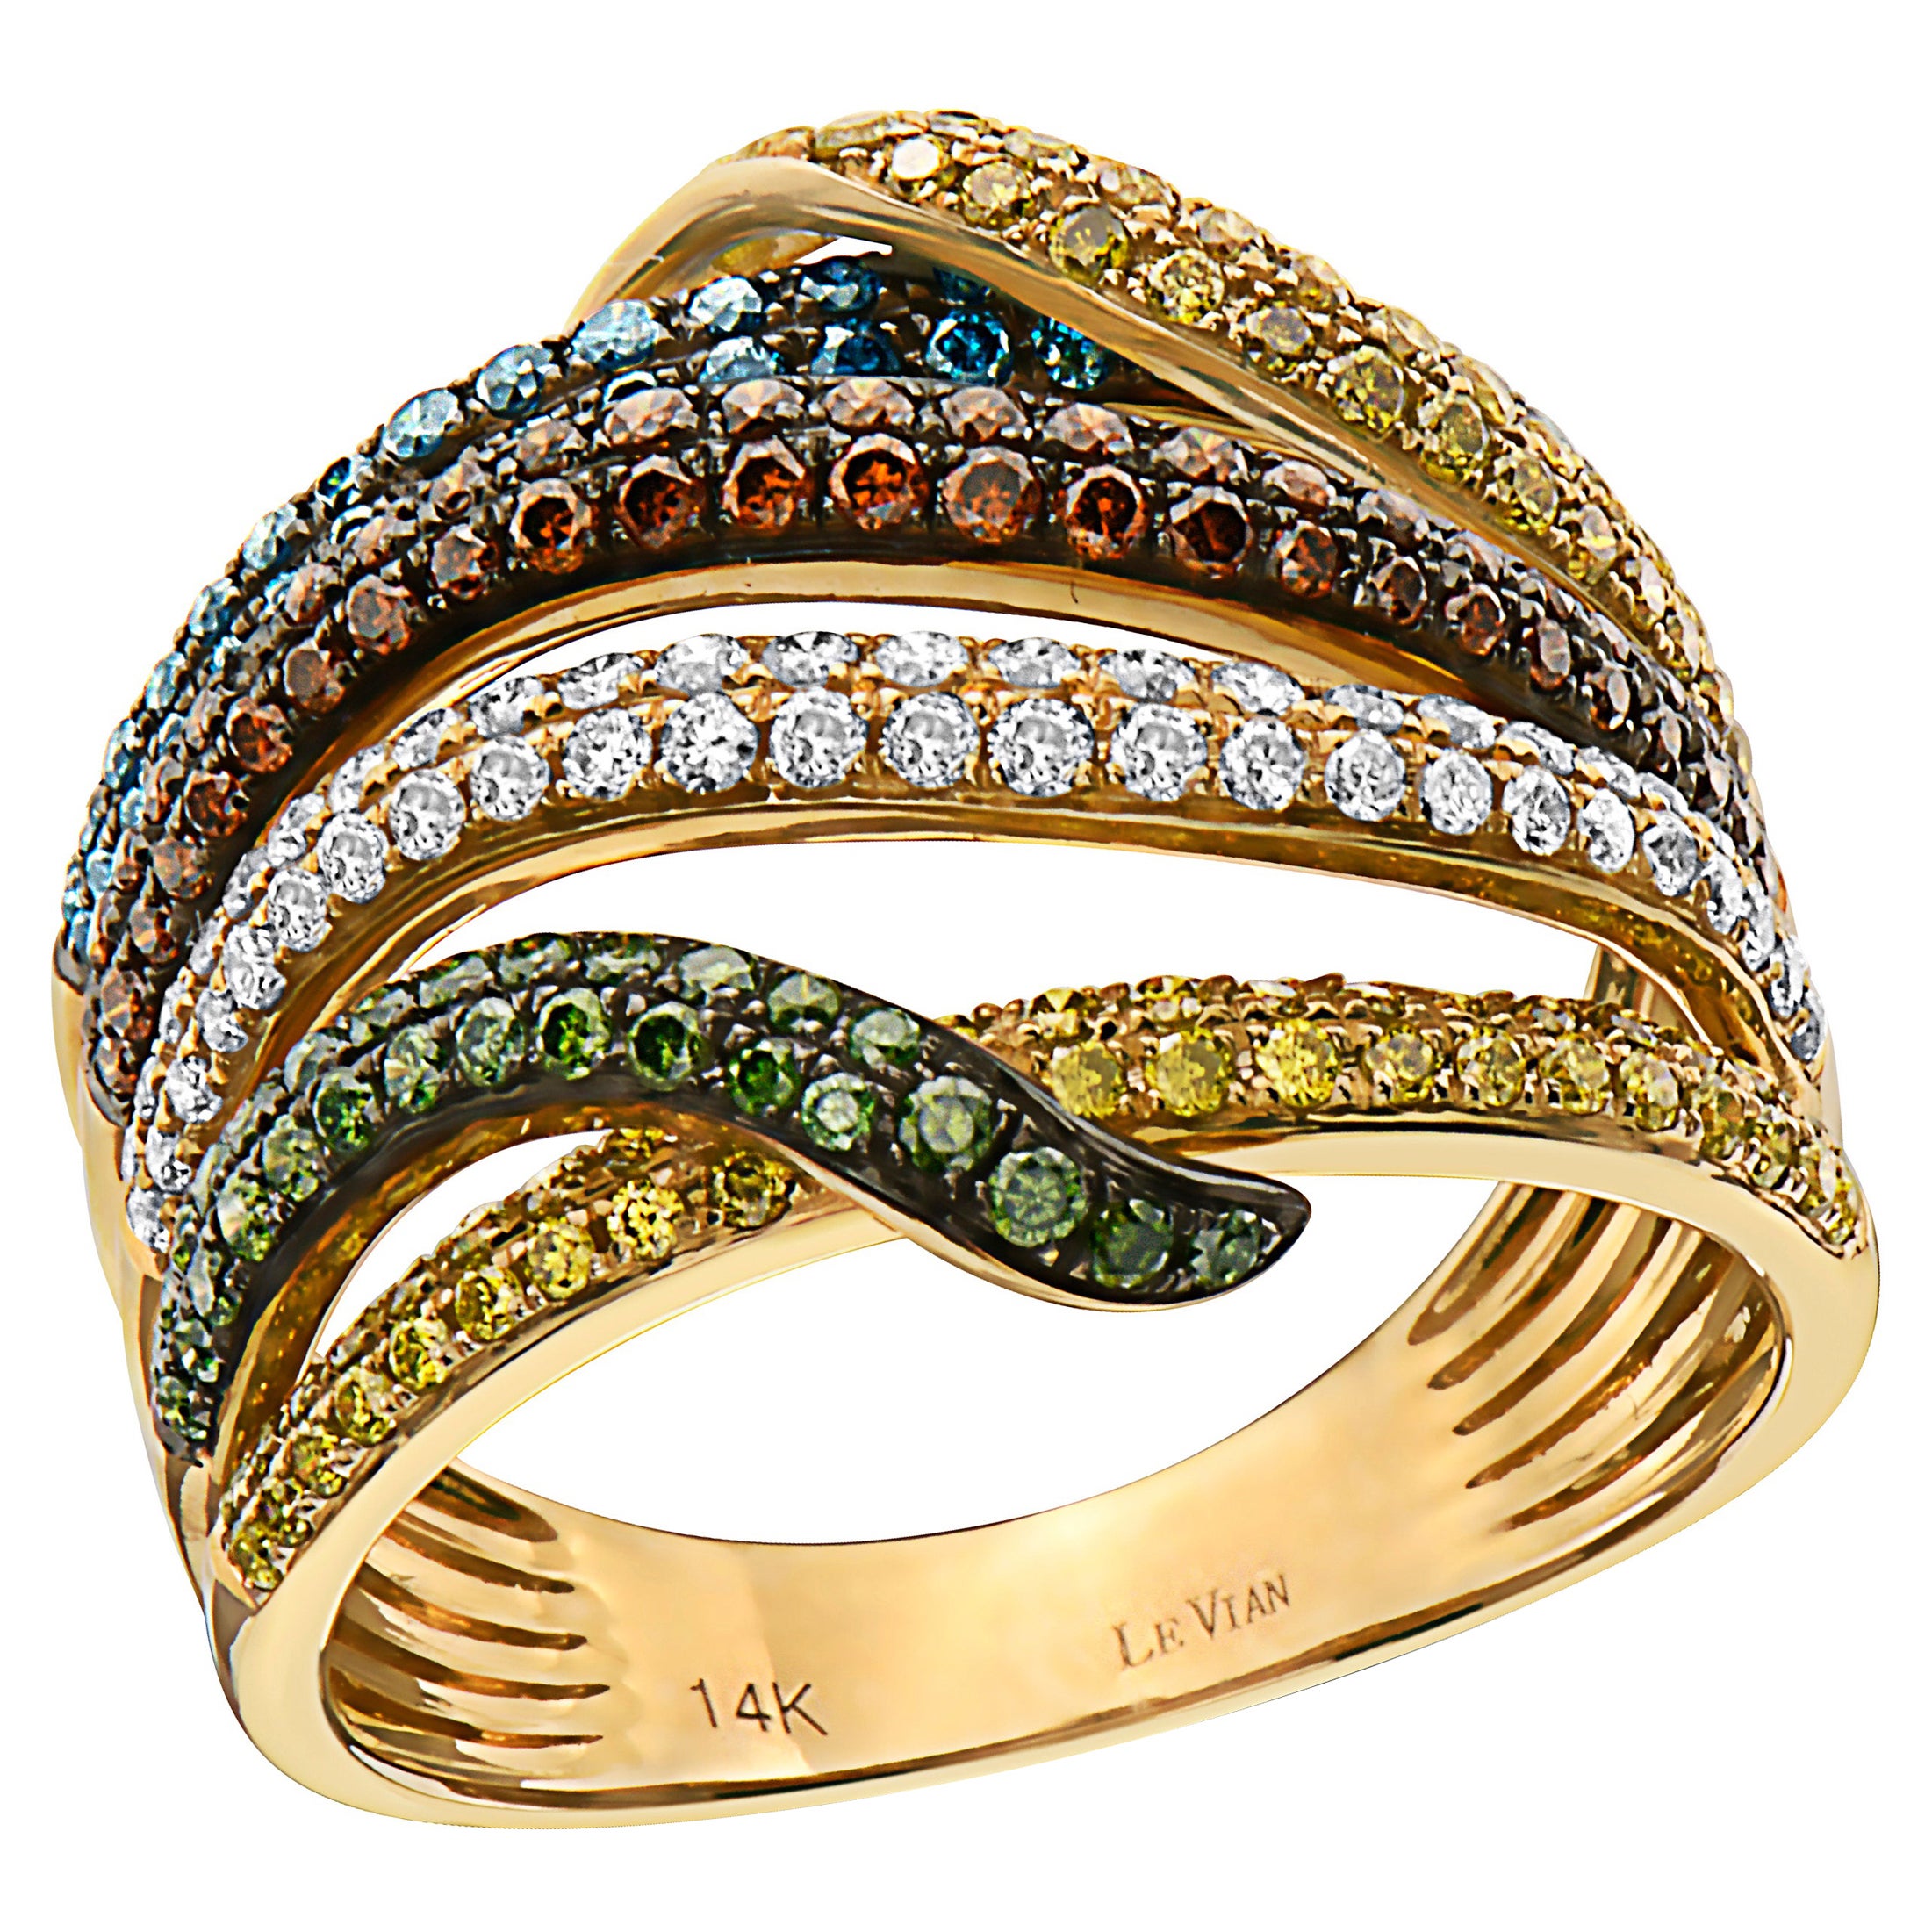 LeVian Ring Blue, Yellow, White and Fancy Diamonds 14K Yellow Gold For ...